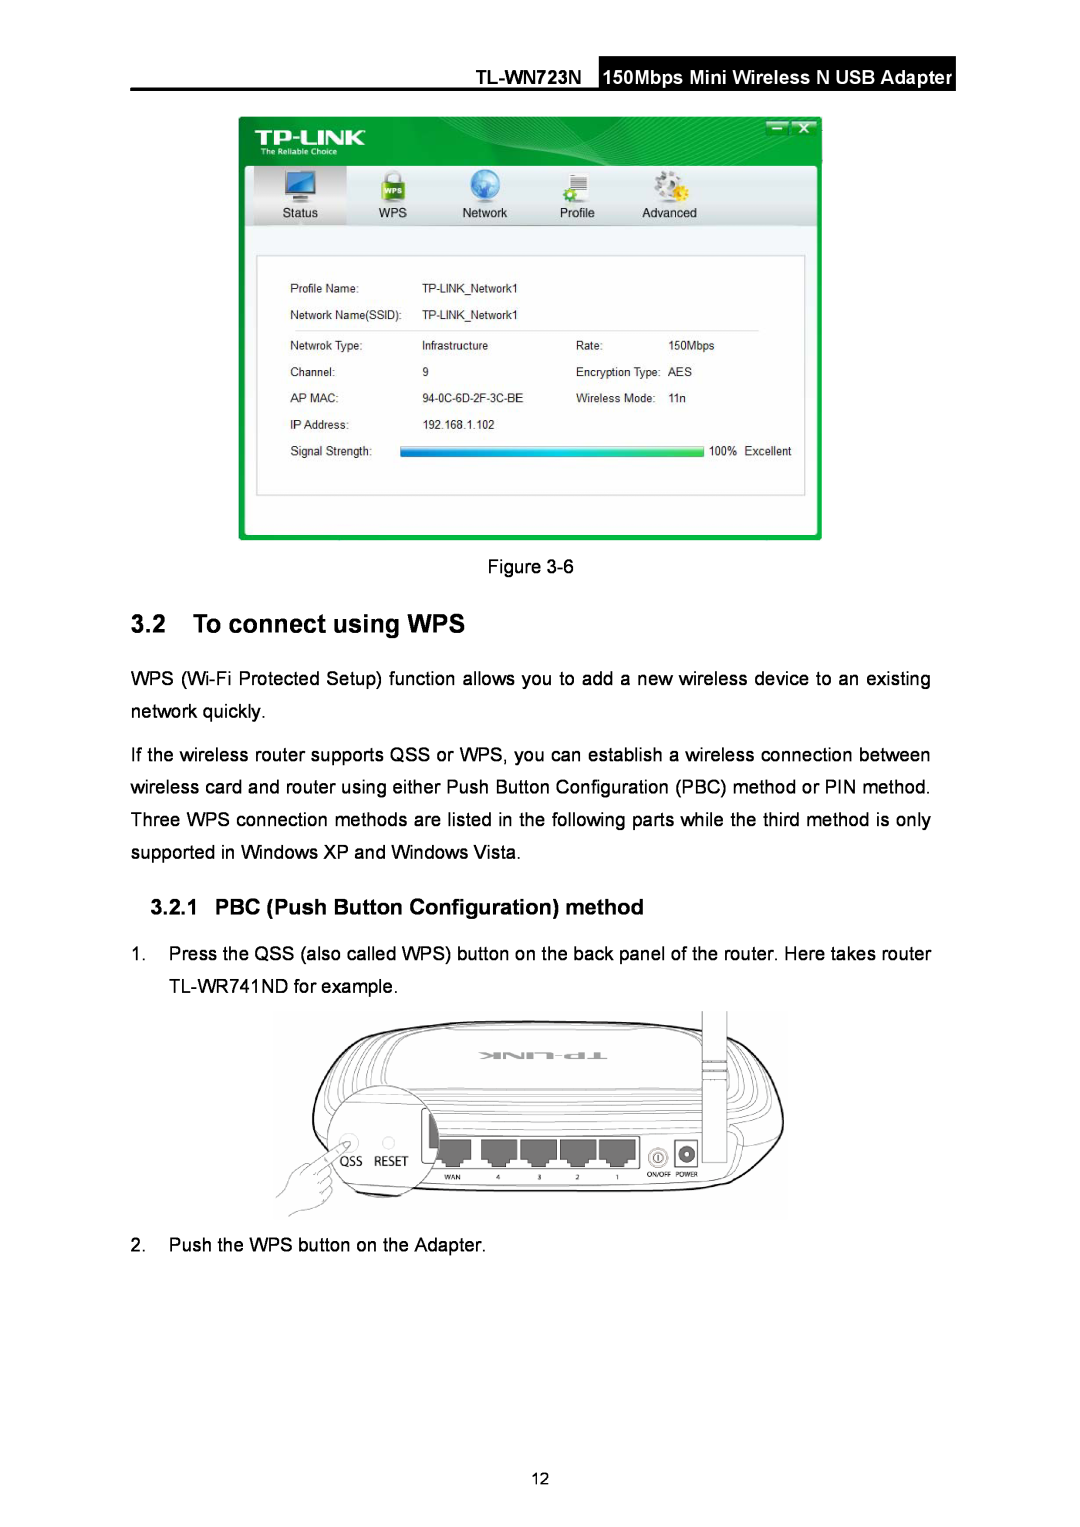 TP-Link TL-WN723N manual To connect using WPS, PBC Push Button Configuration method 